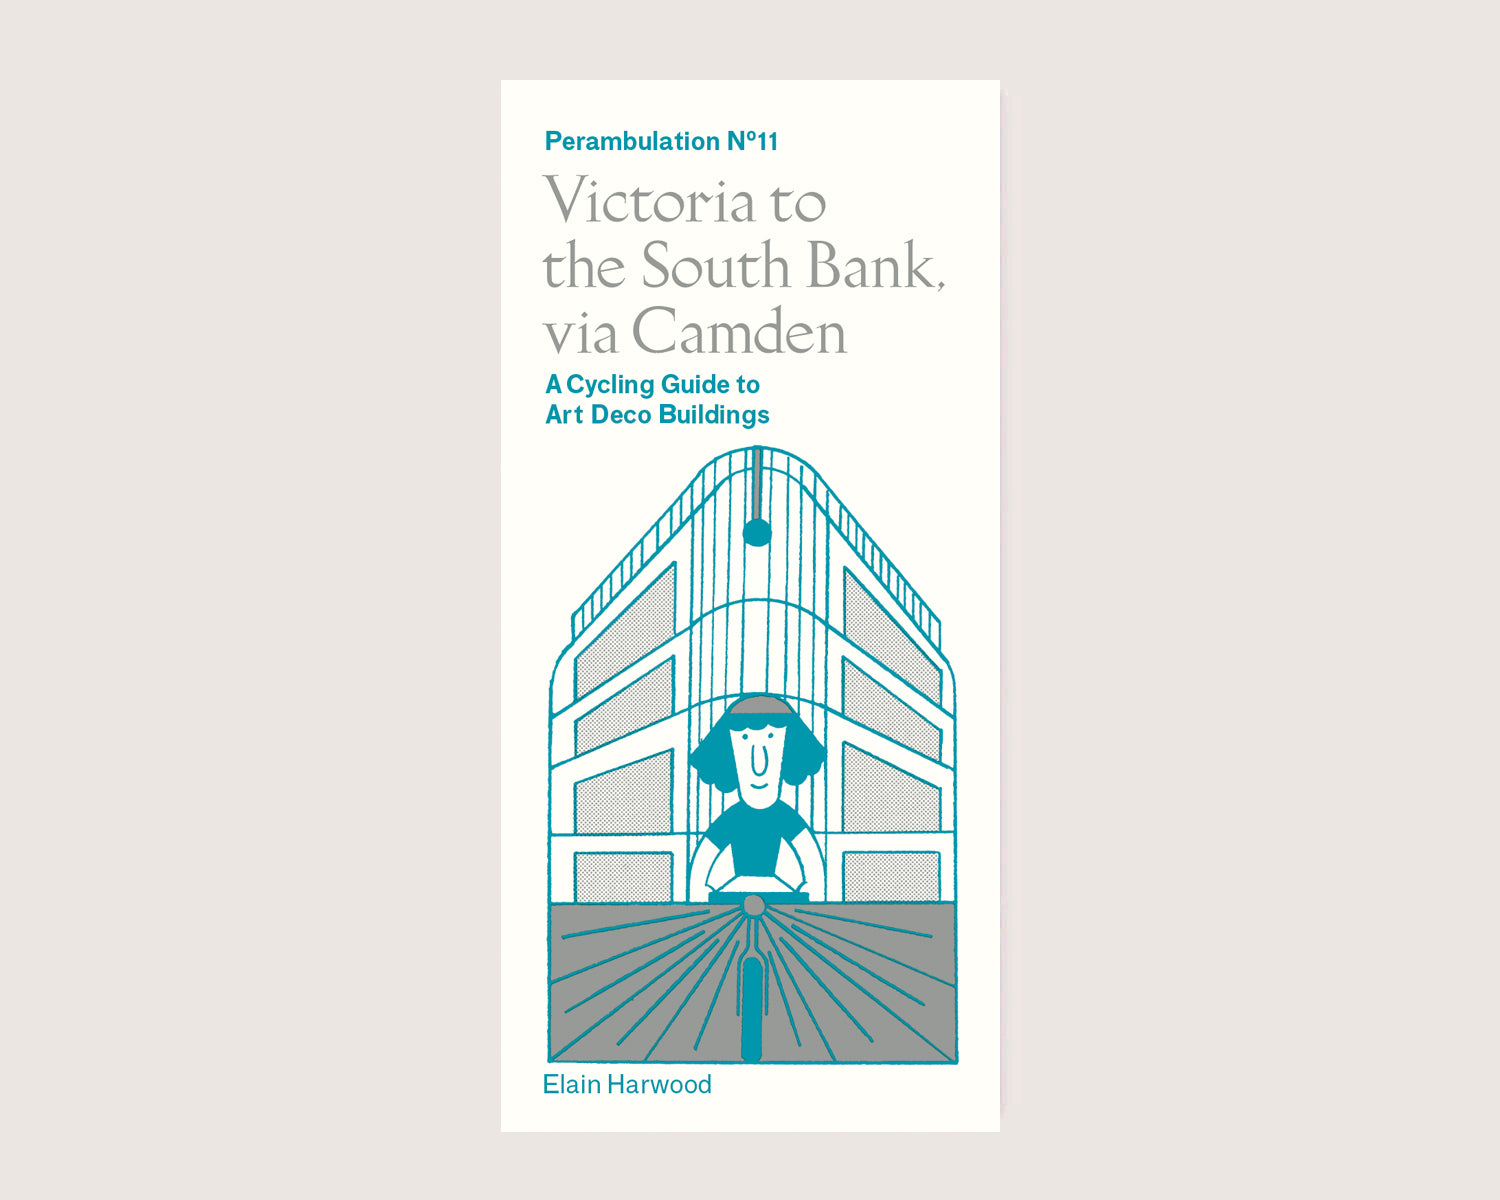 Perambulation Nº11—A Cycling Guide to Art Deco Buildings in London by Elain Harwood